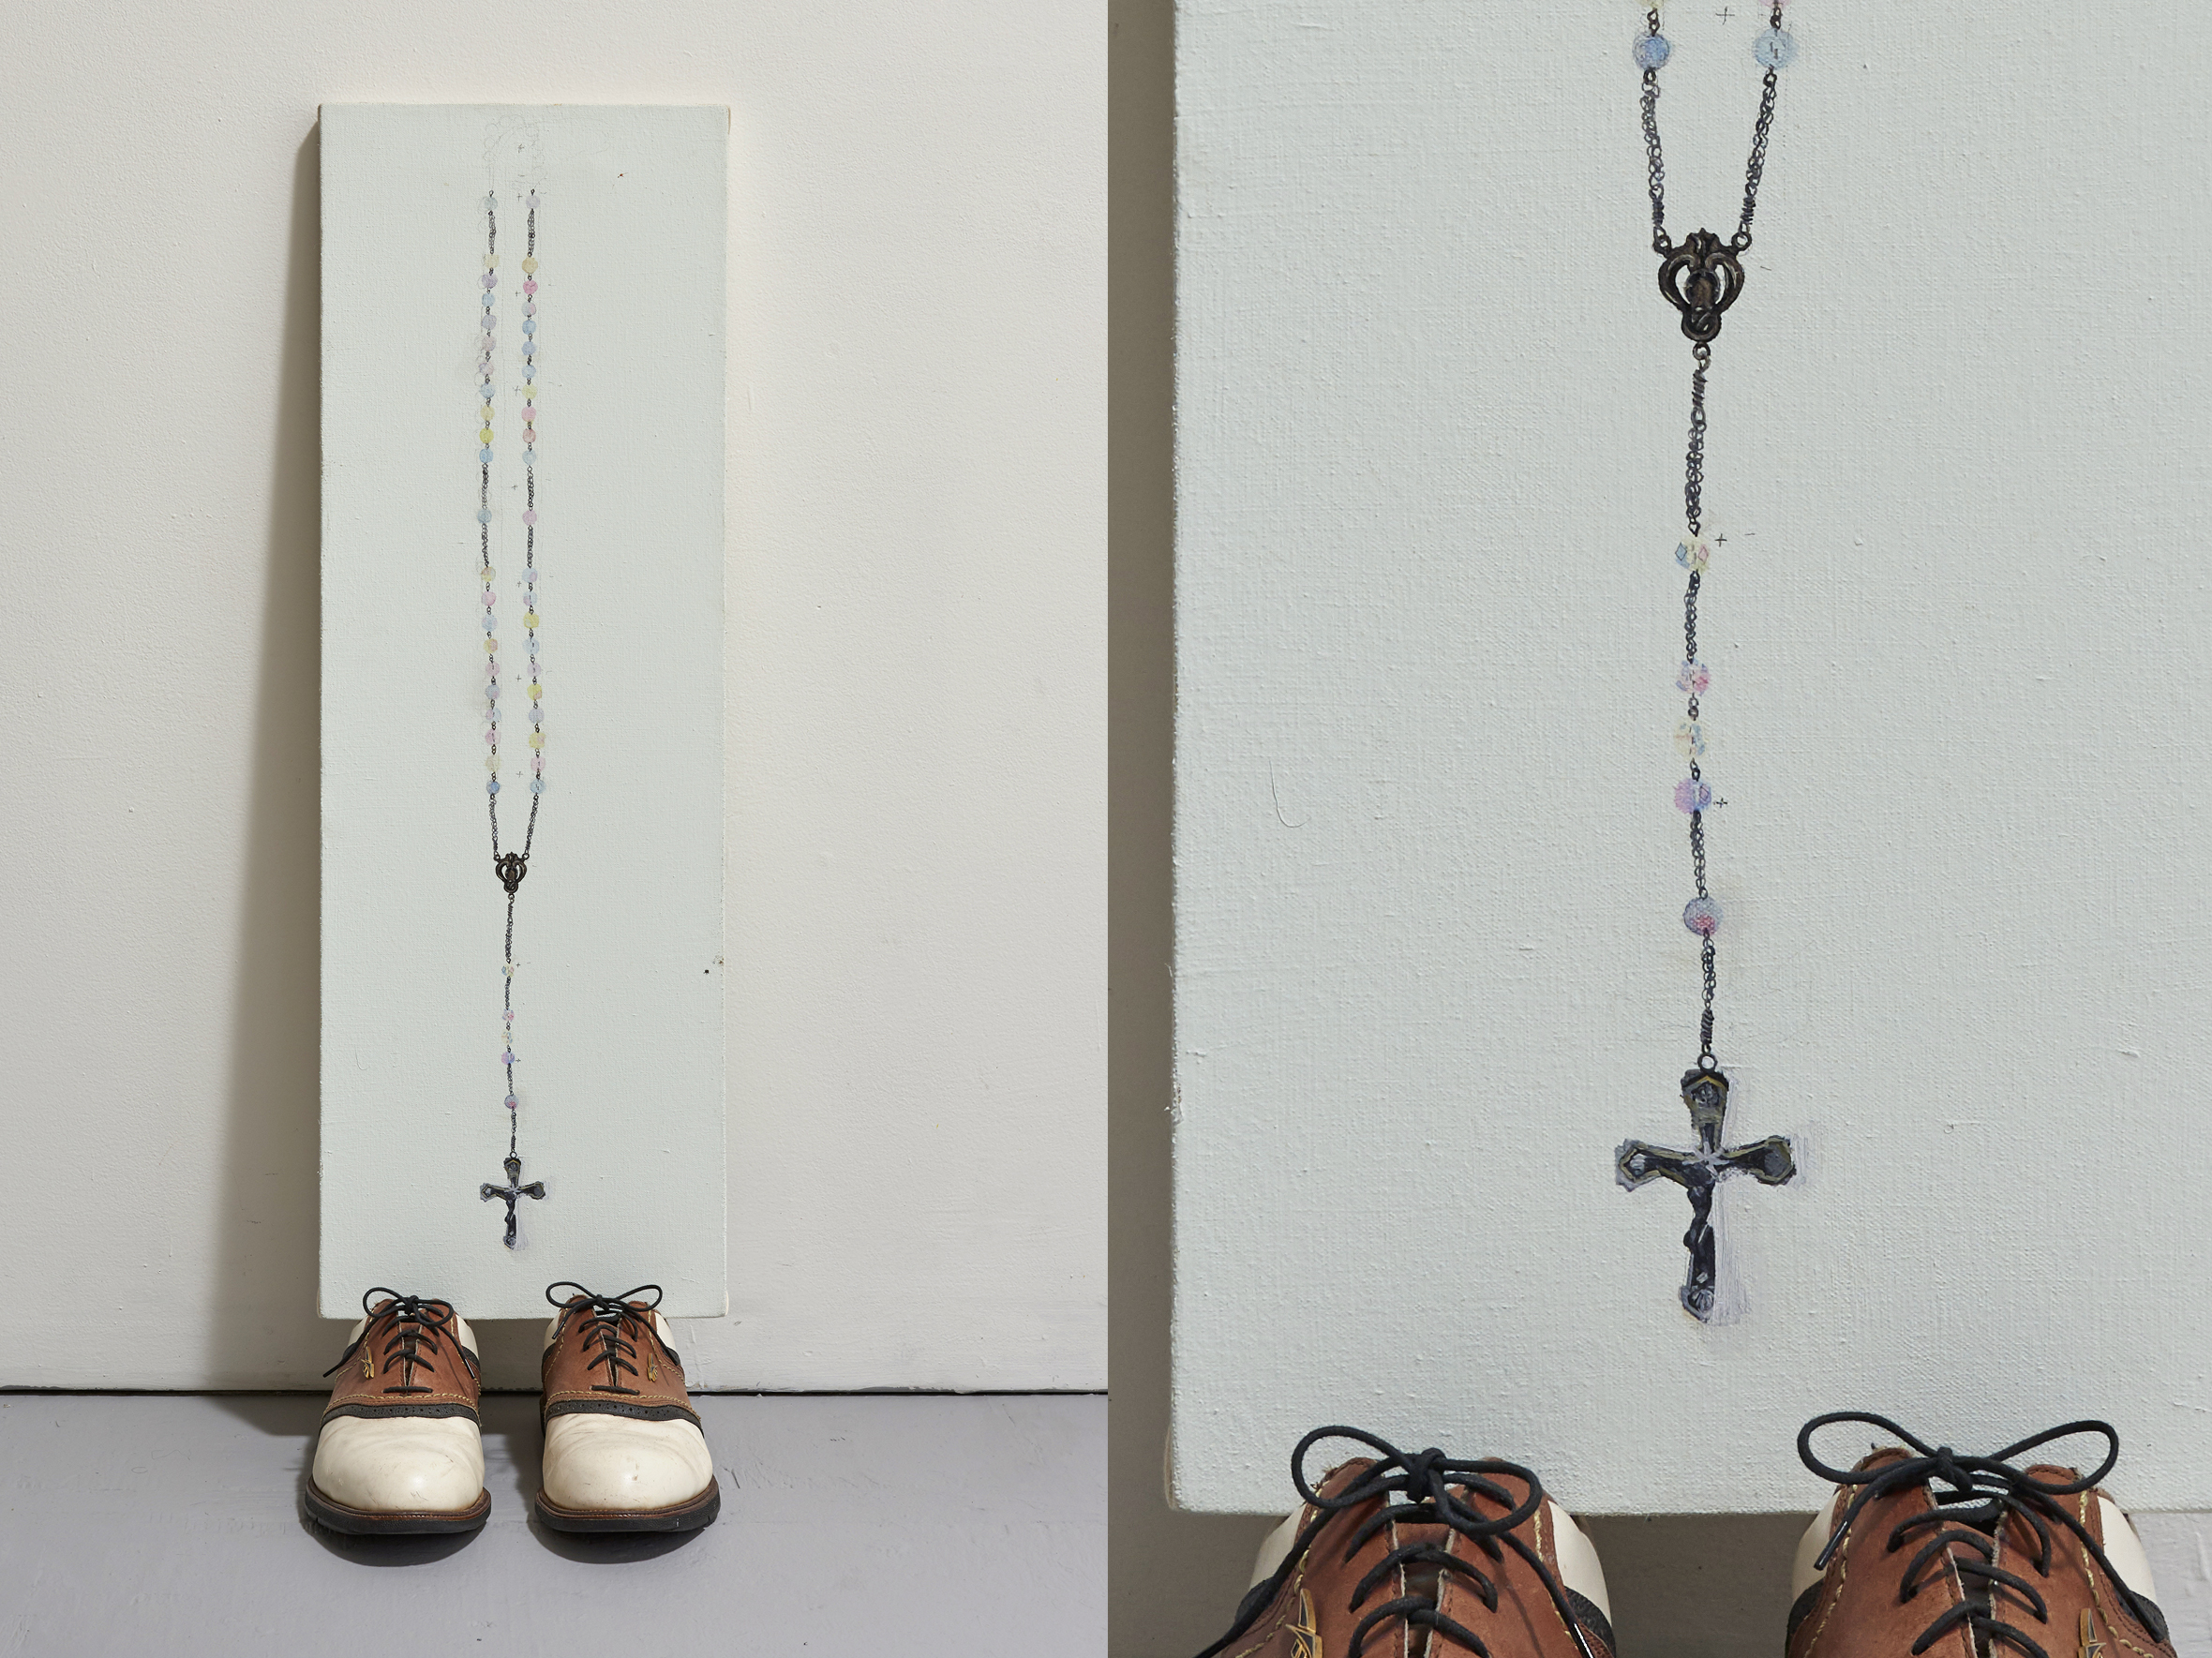   Ribeiro Rosary Resting on Pizzoferrato Golf Shoes   house paint and oil on canvas, Dad’s golf shoes   33.5” x 10” x 13”   2017 – 19 